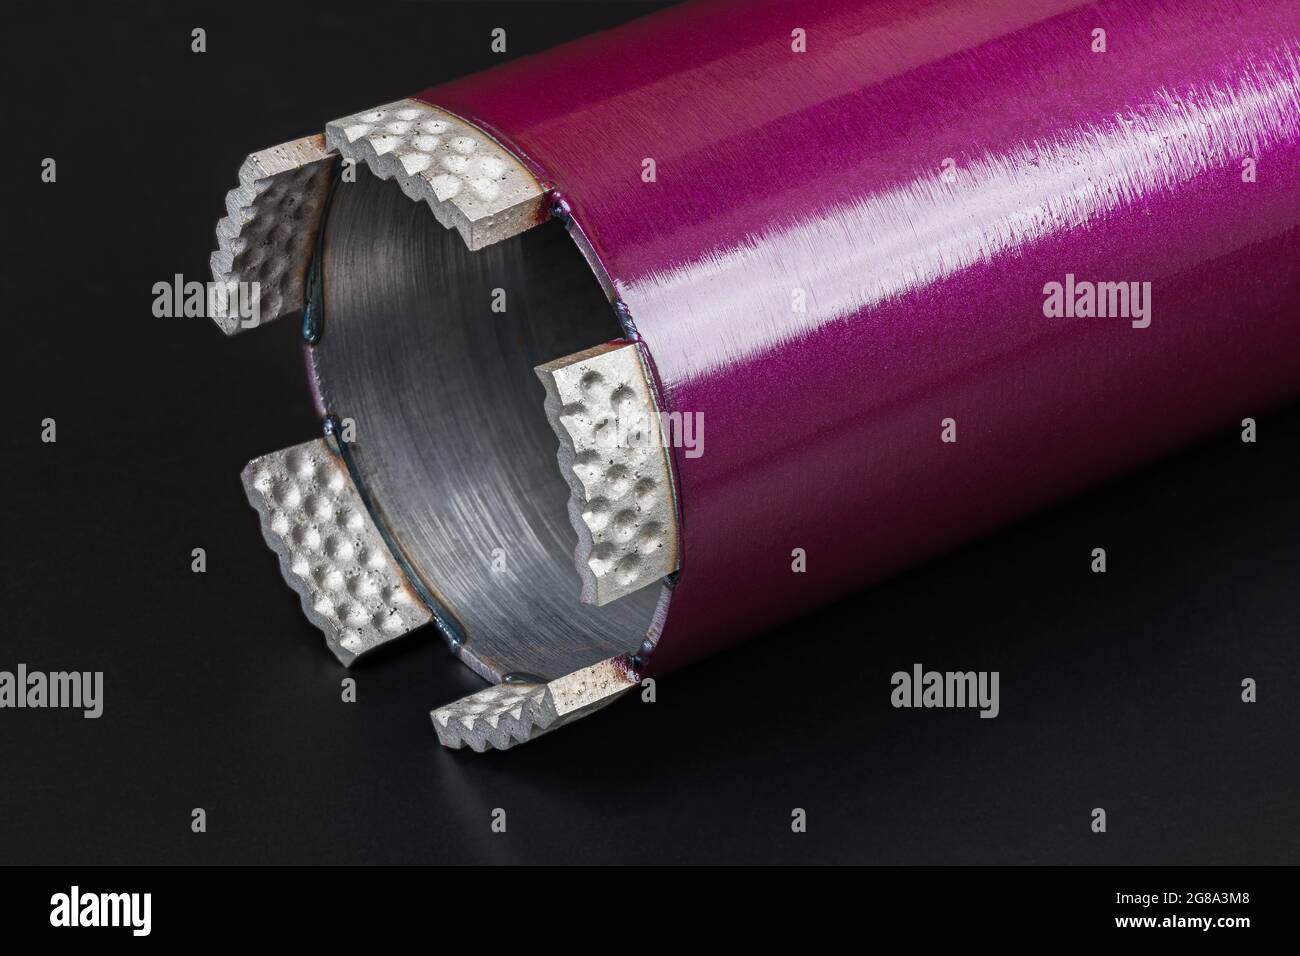 Modern core drill bit in beautiful detail on a black background. Purple water cooled hole saw cutter with sharp crown of diamond grit alloy segments. Stock Photo